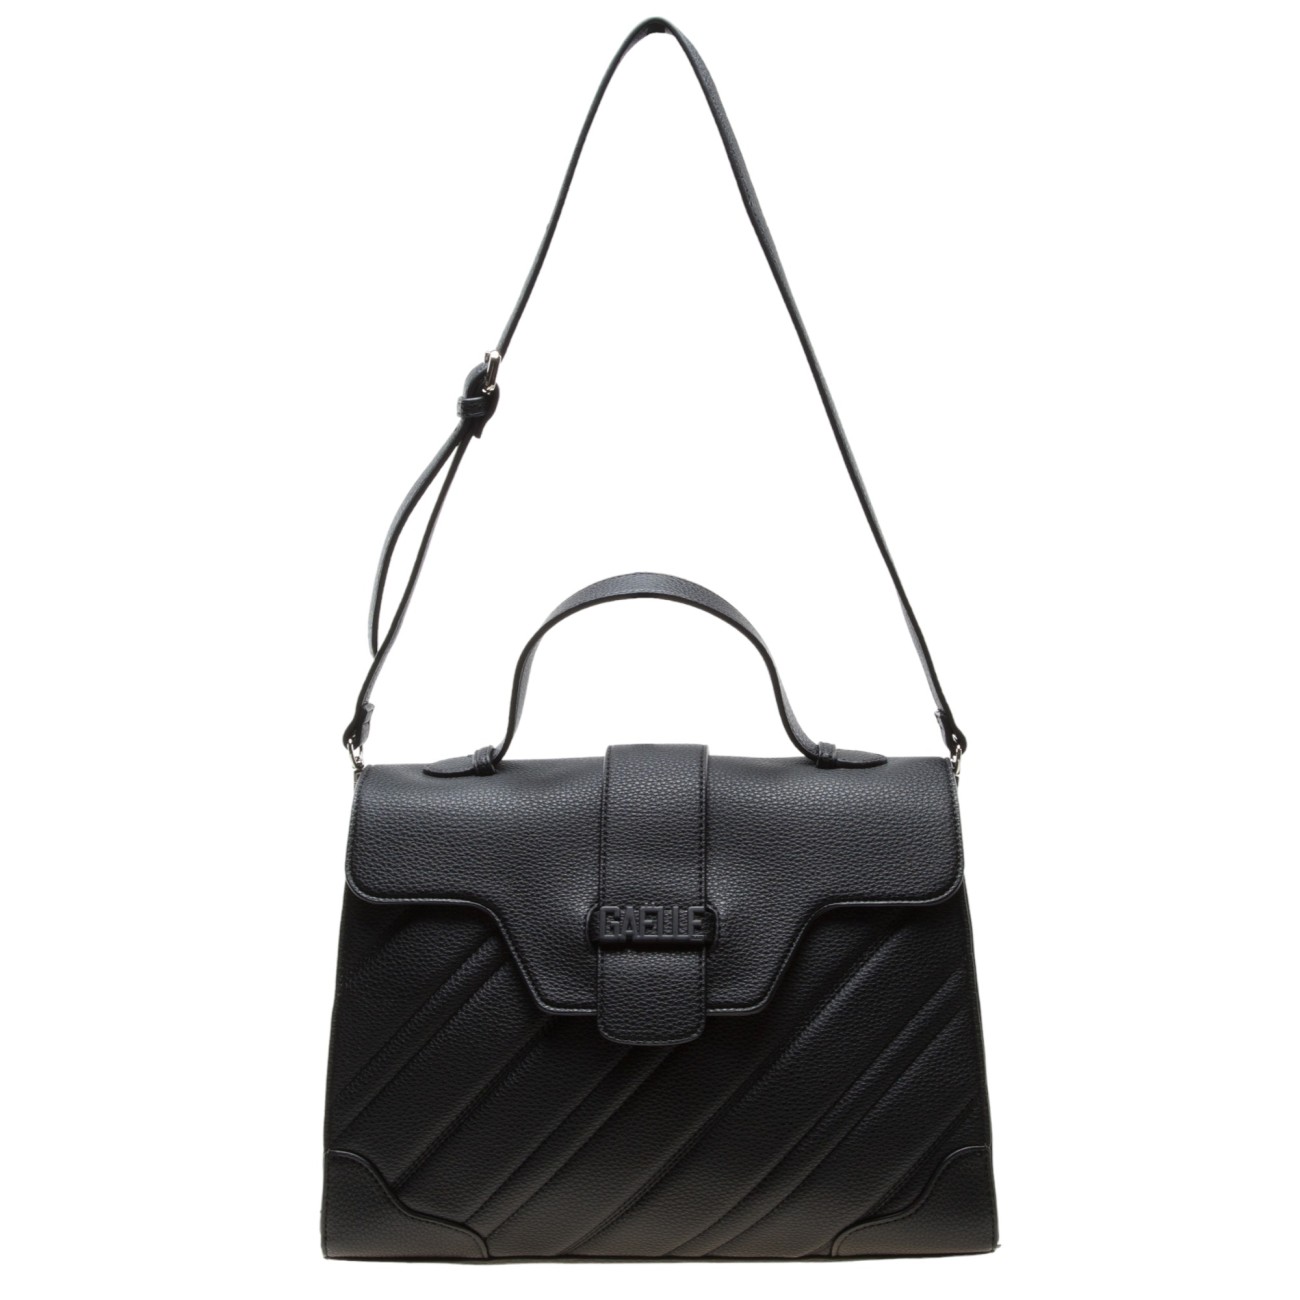 Gaelle maxi black quilted bag